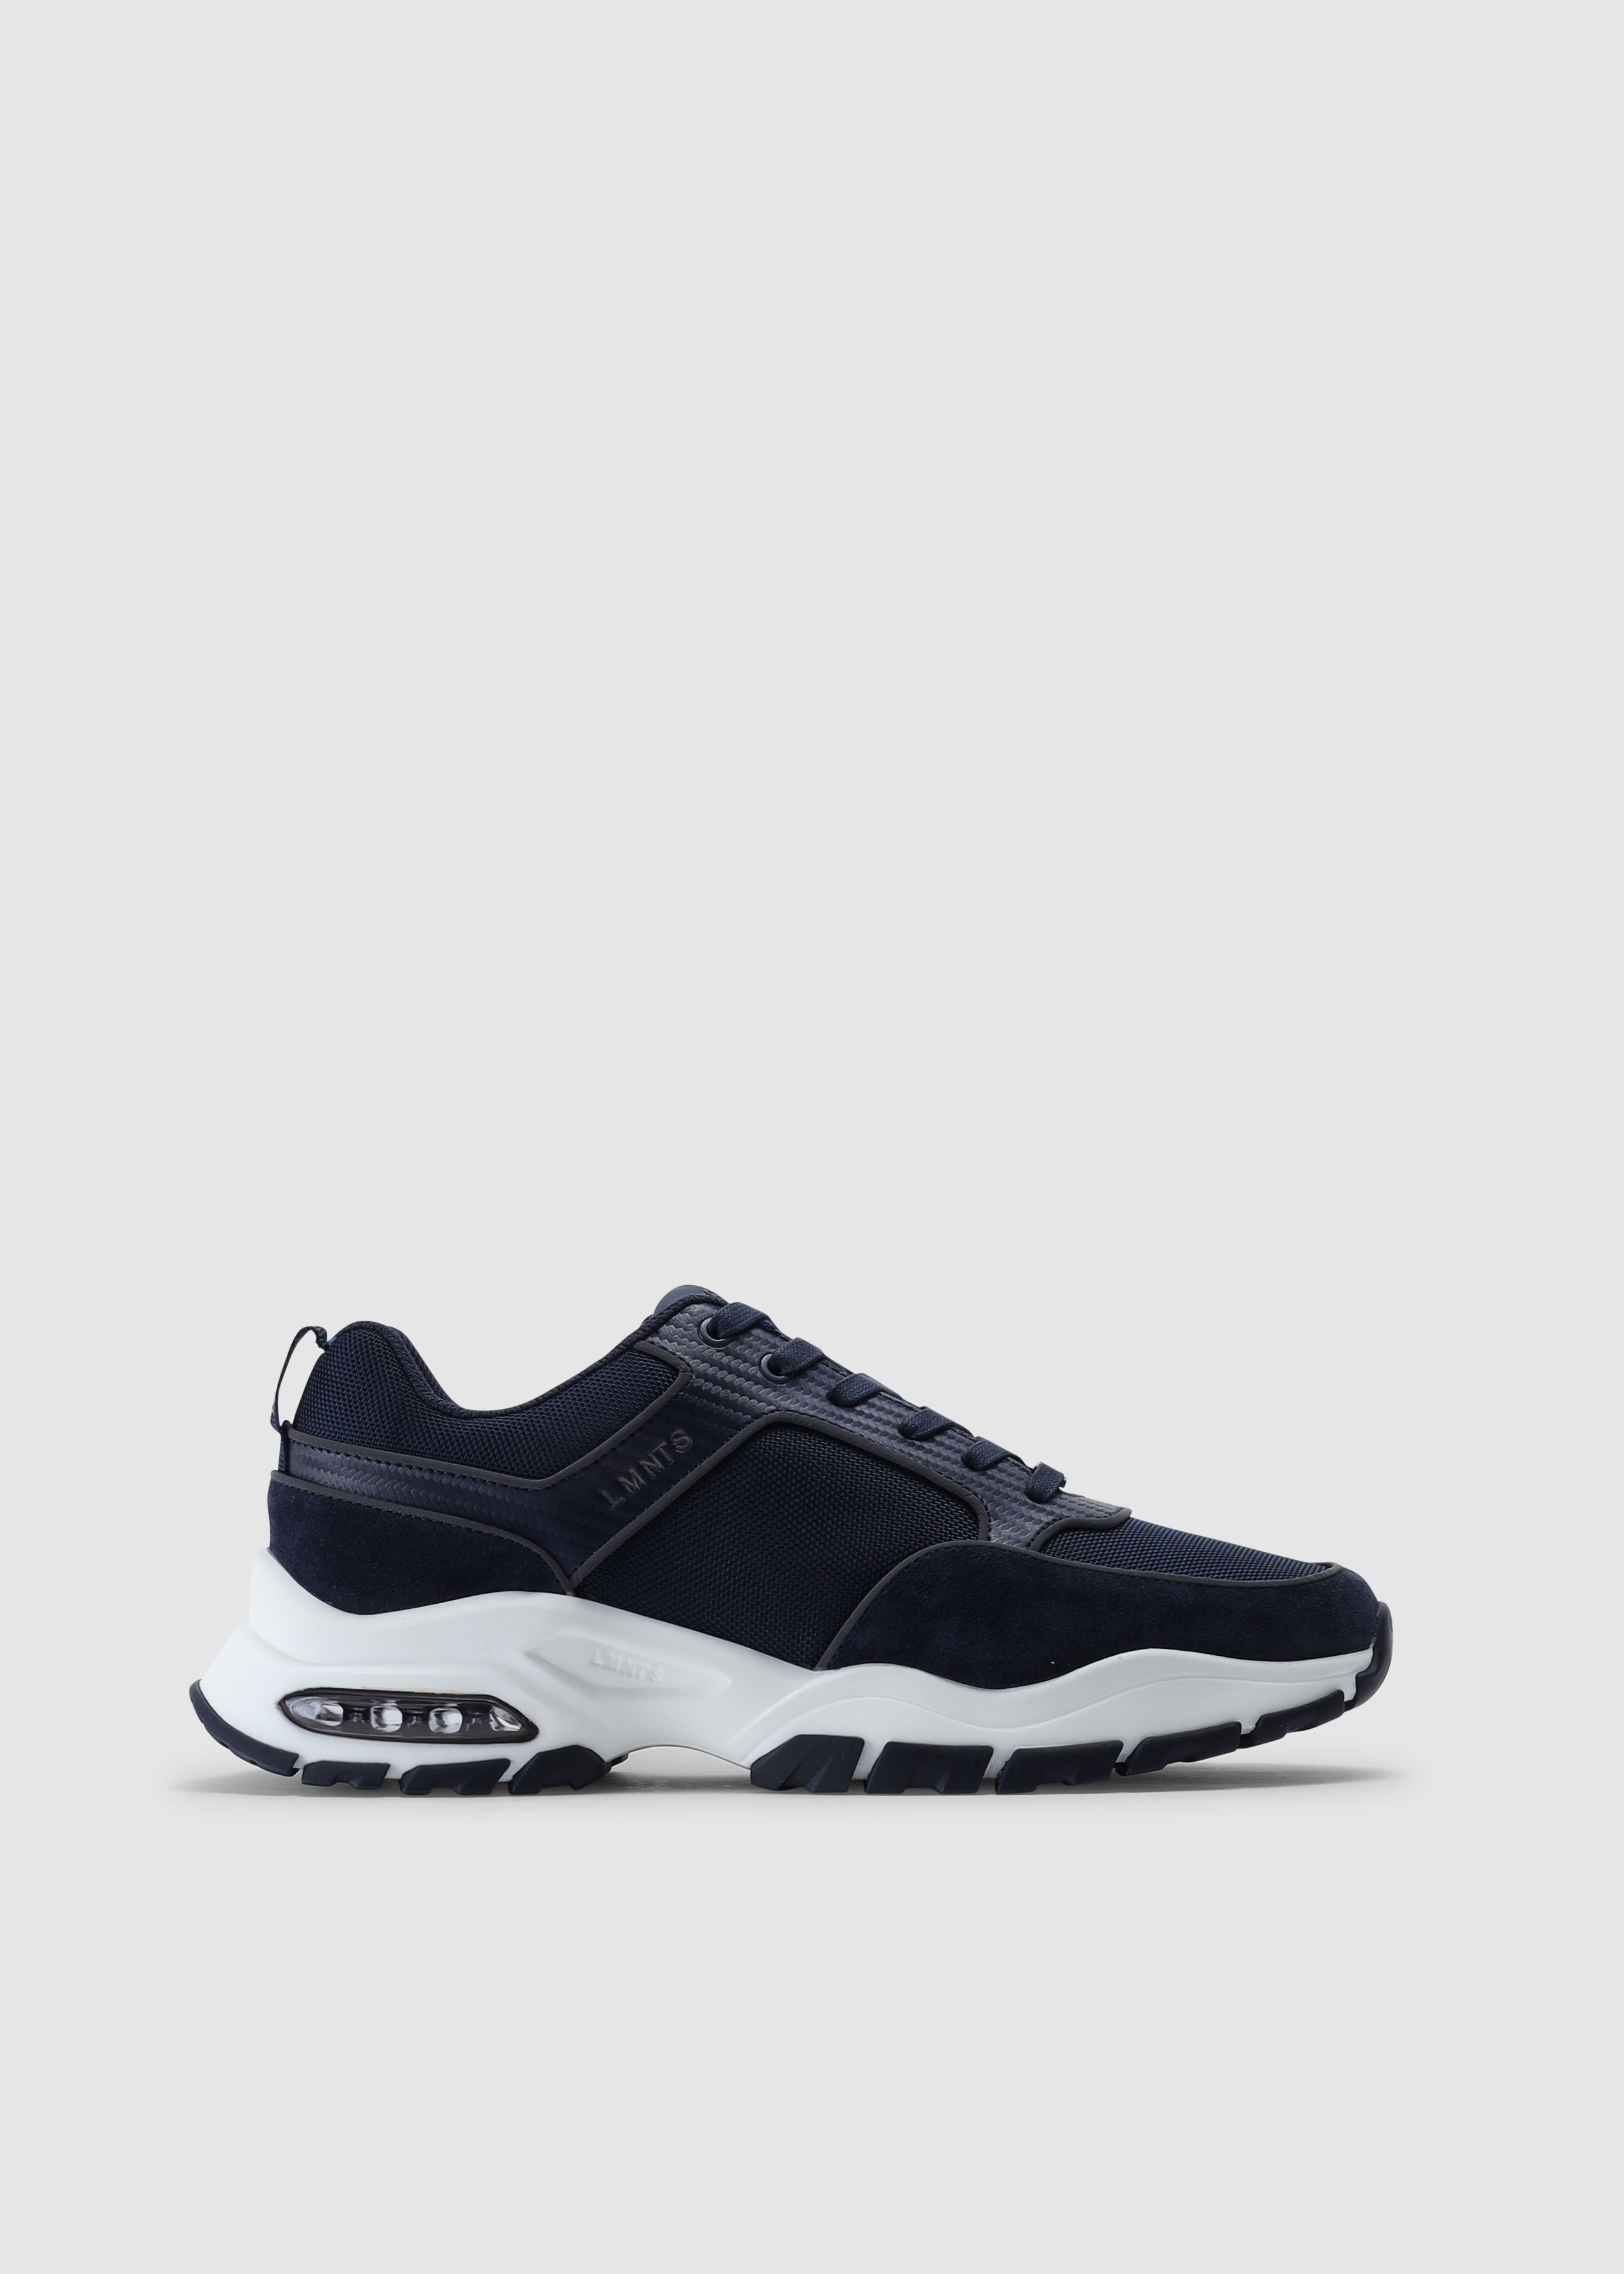 LMNTS Mens Carbon Runner Trainers